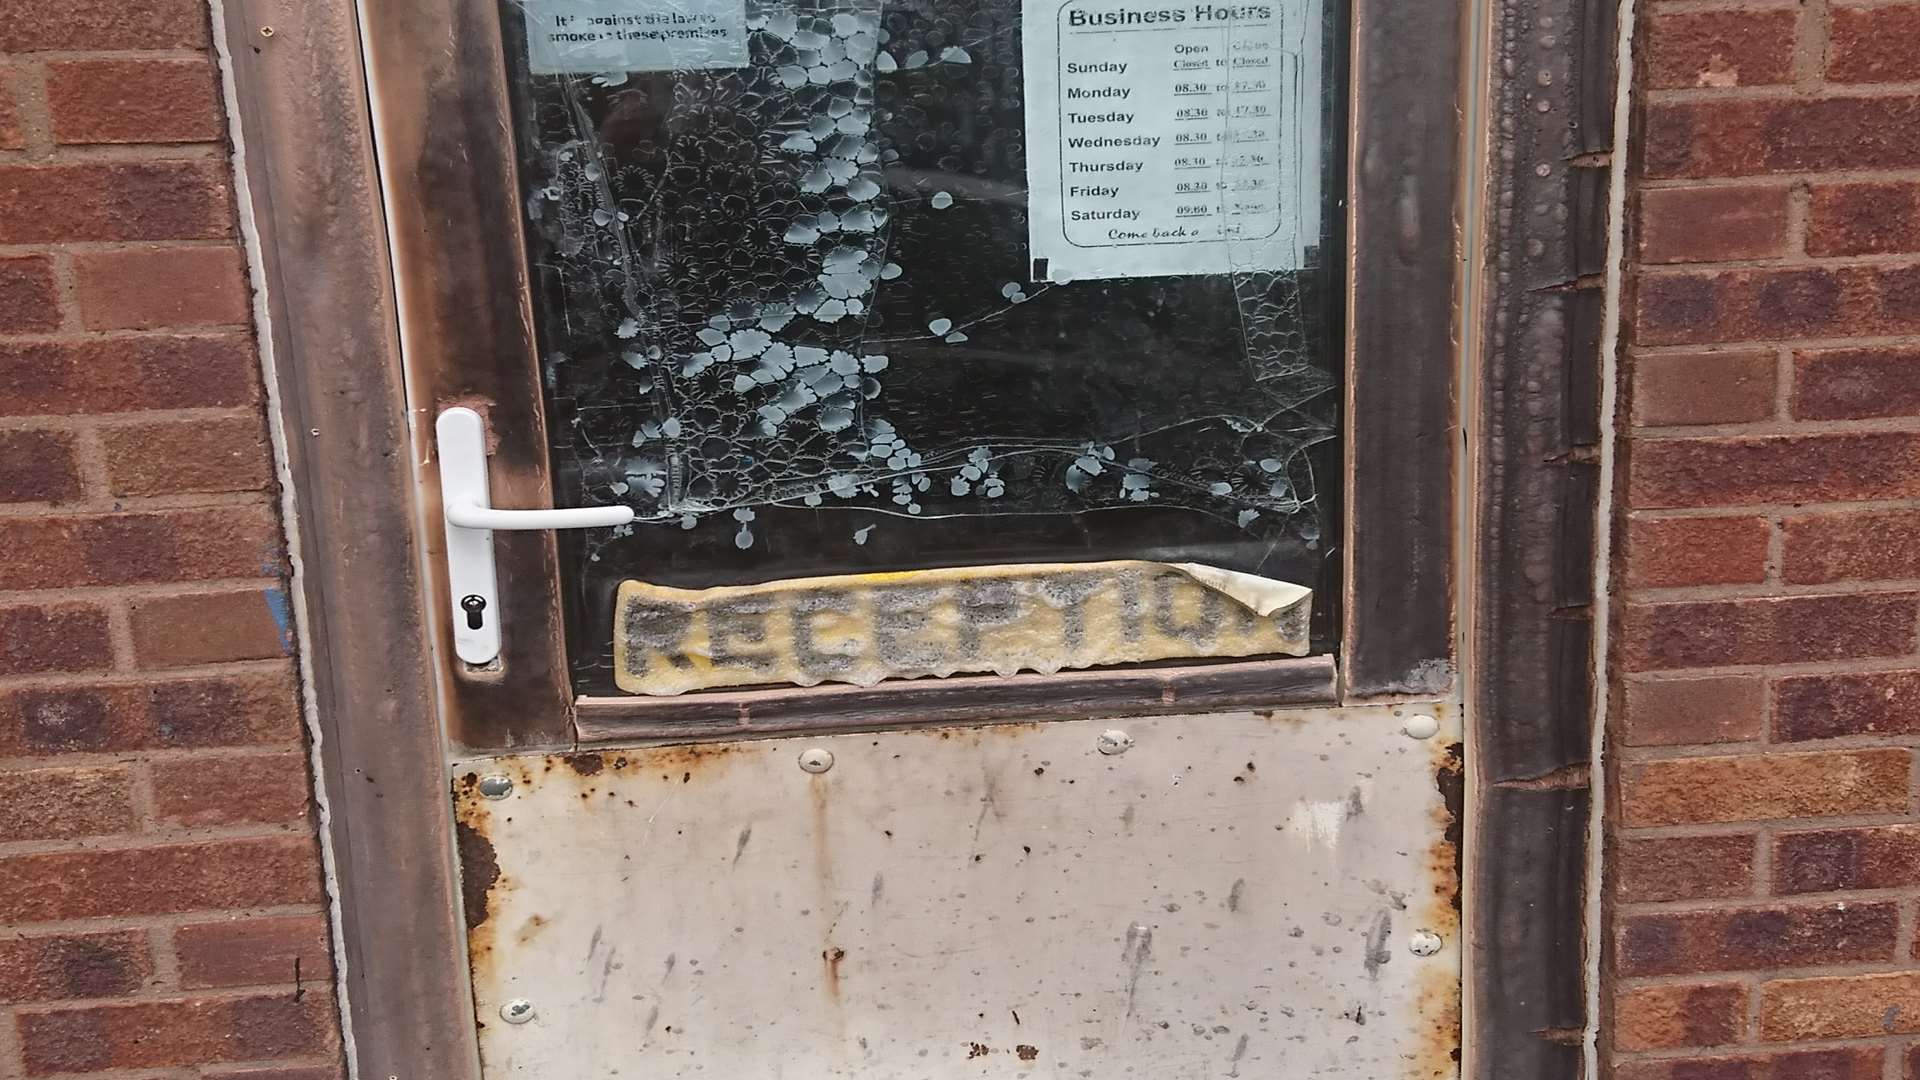 The reception sign on the door melted